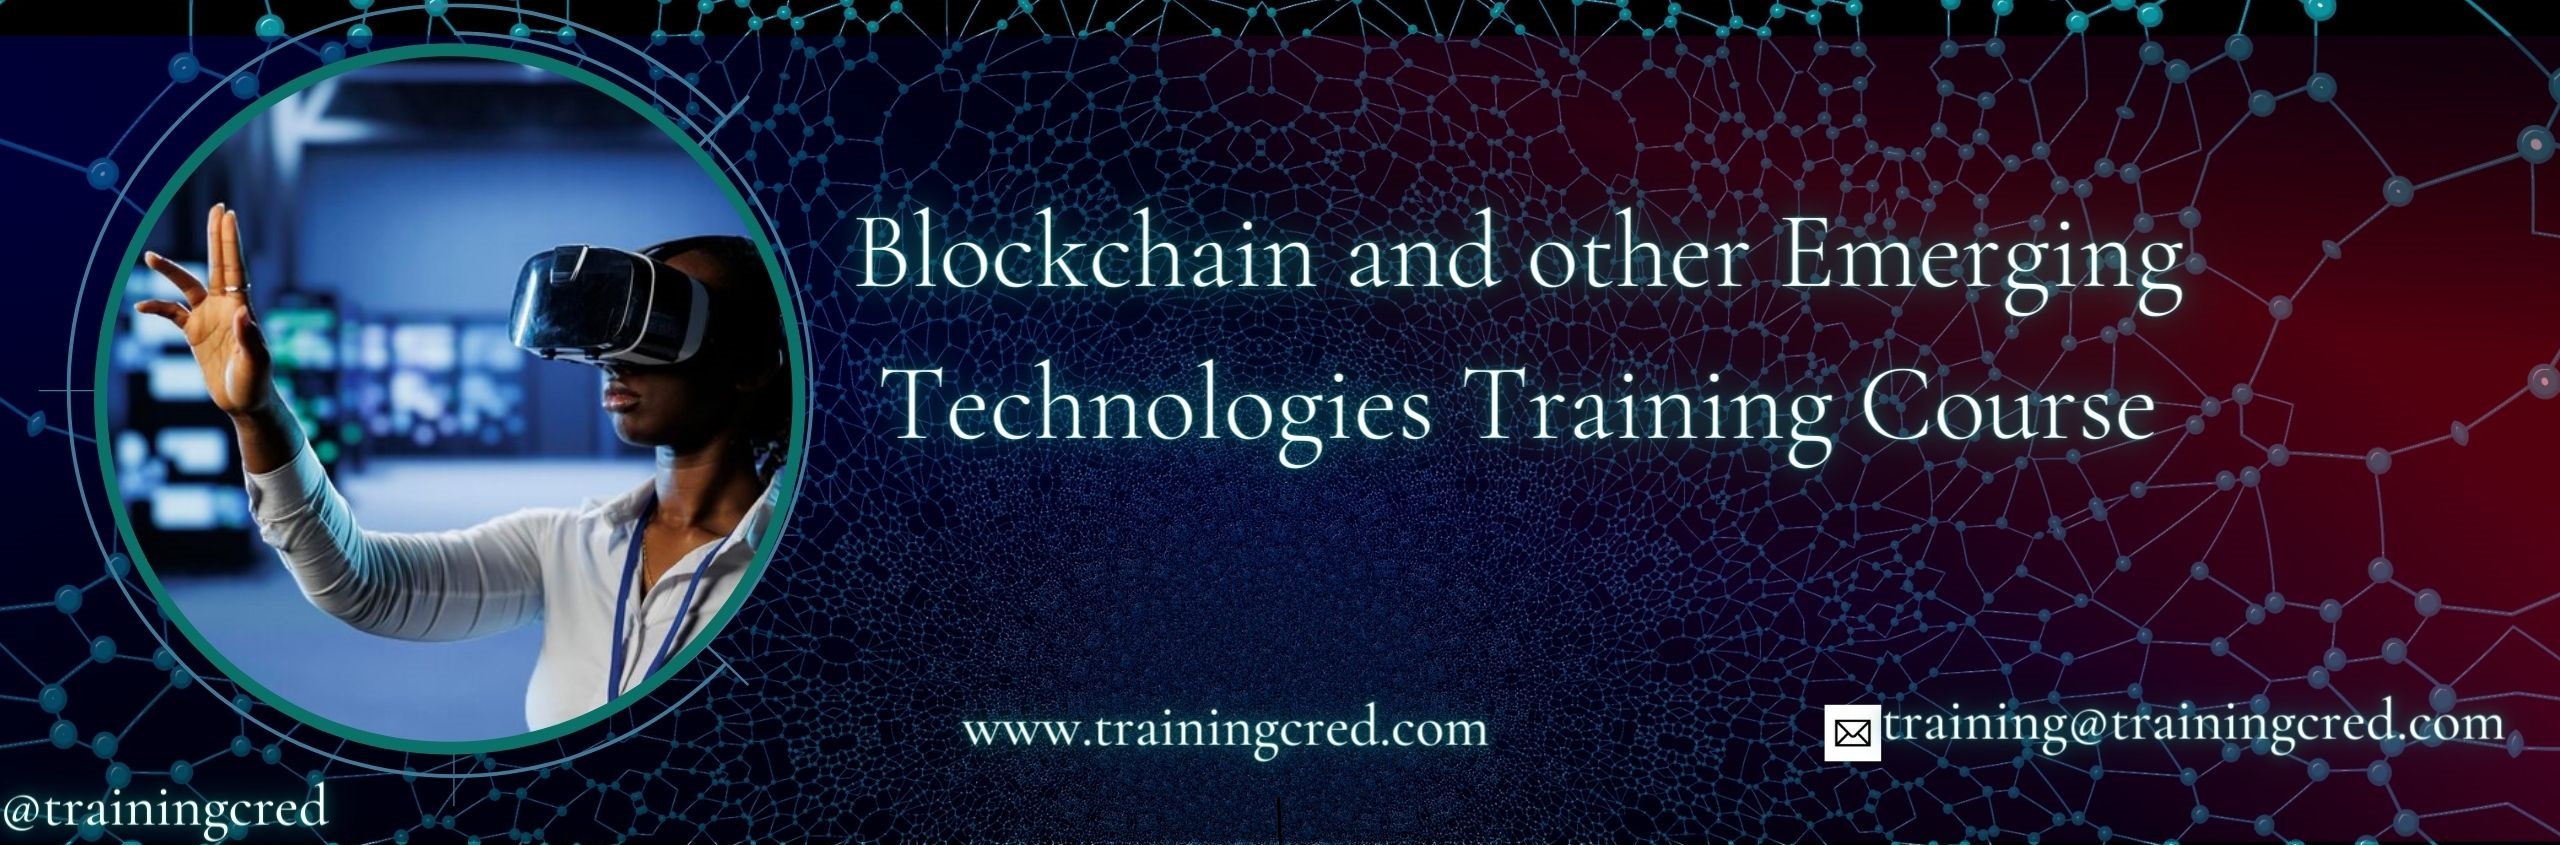 Blockchain and other Emerging Technologies Training